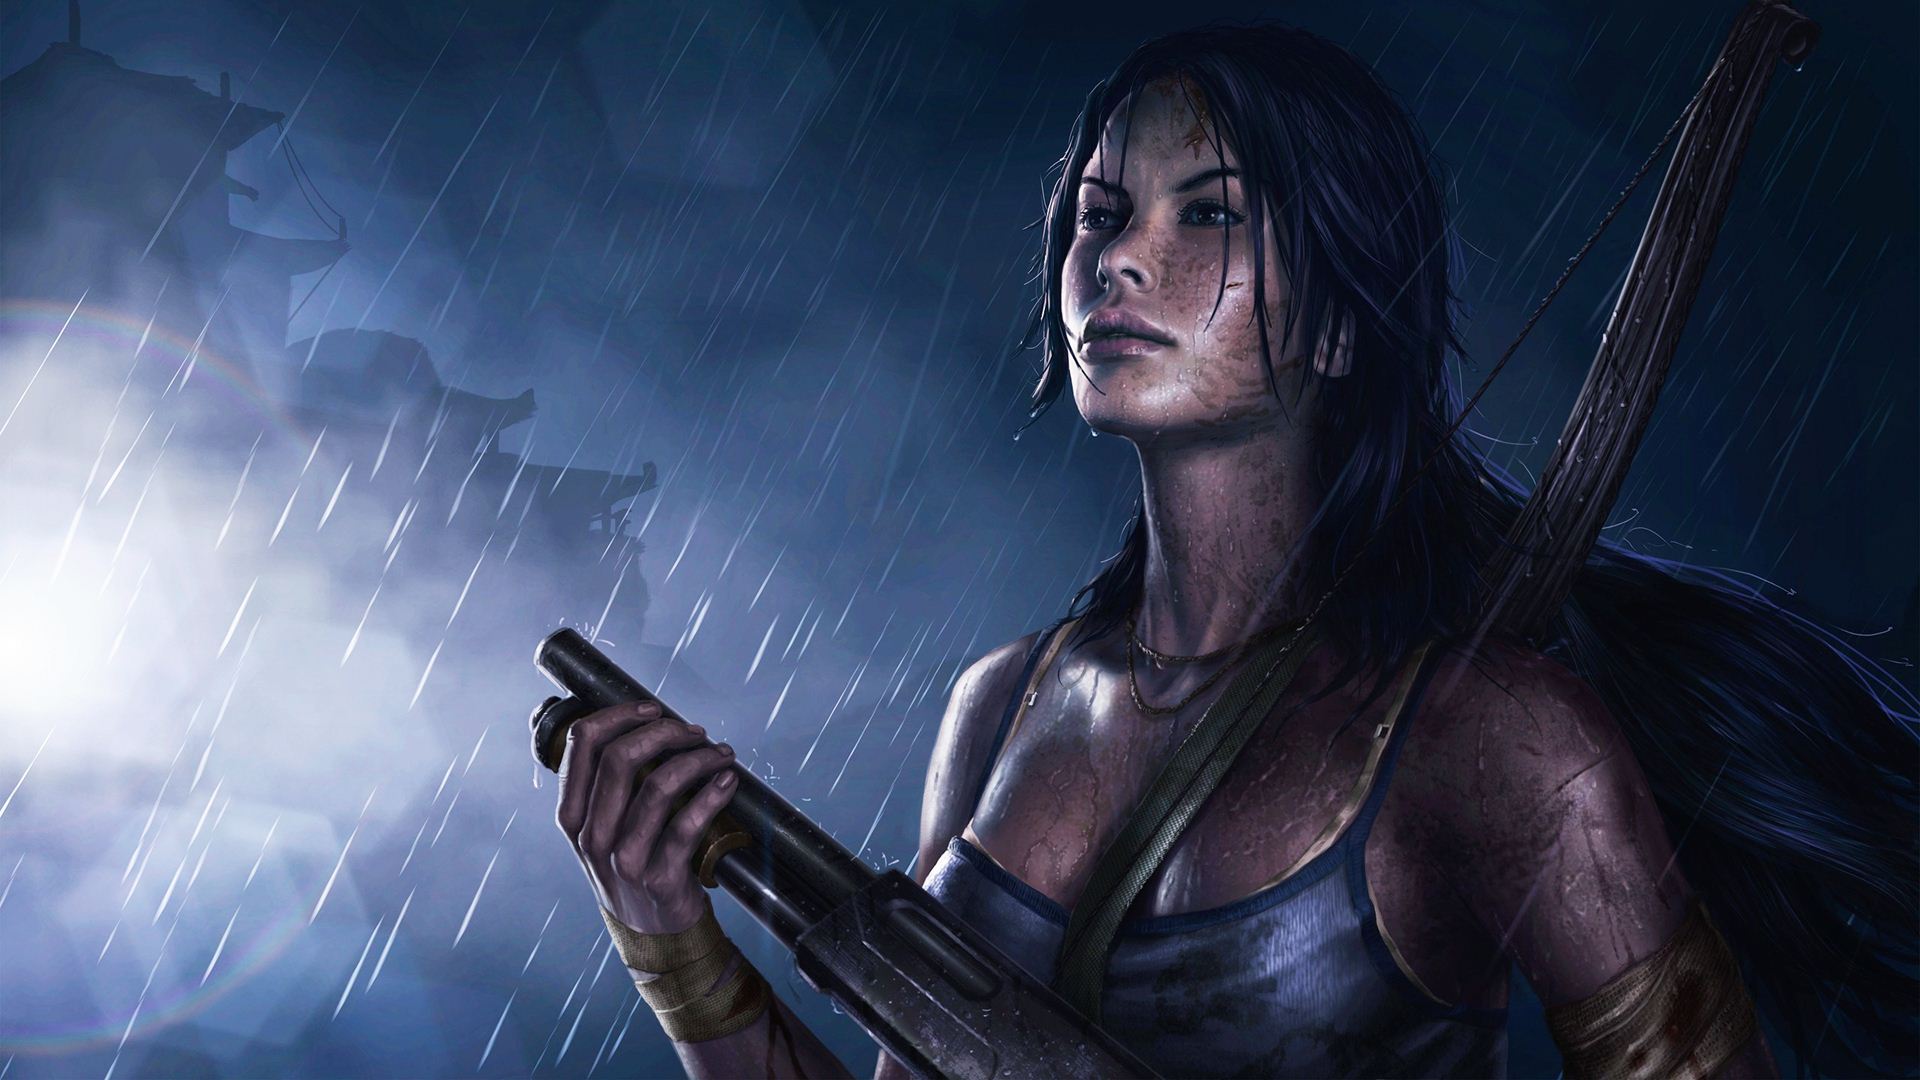 Tomb Raider Wallpapers | Best Wallpapers